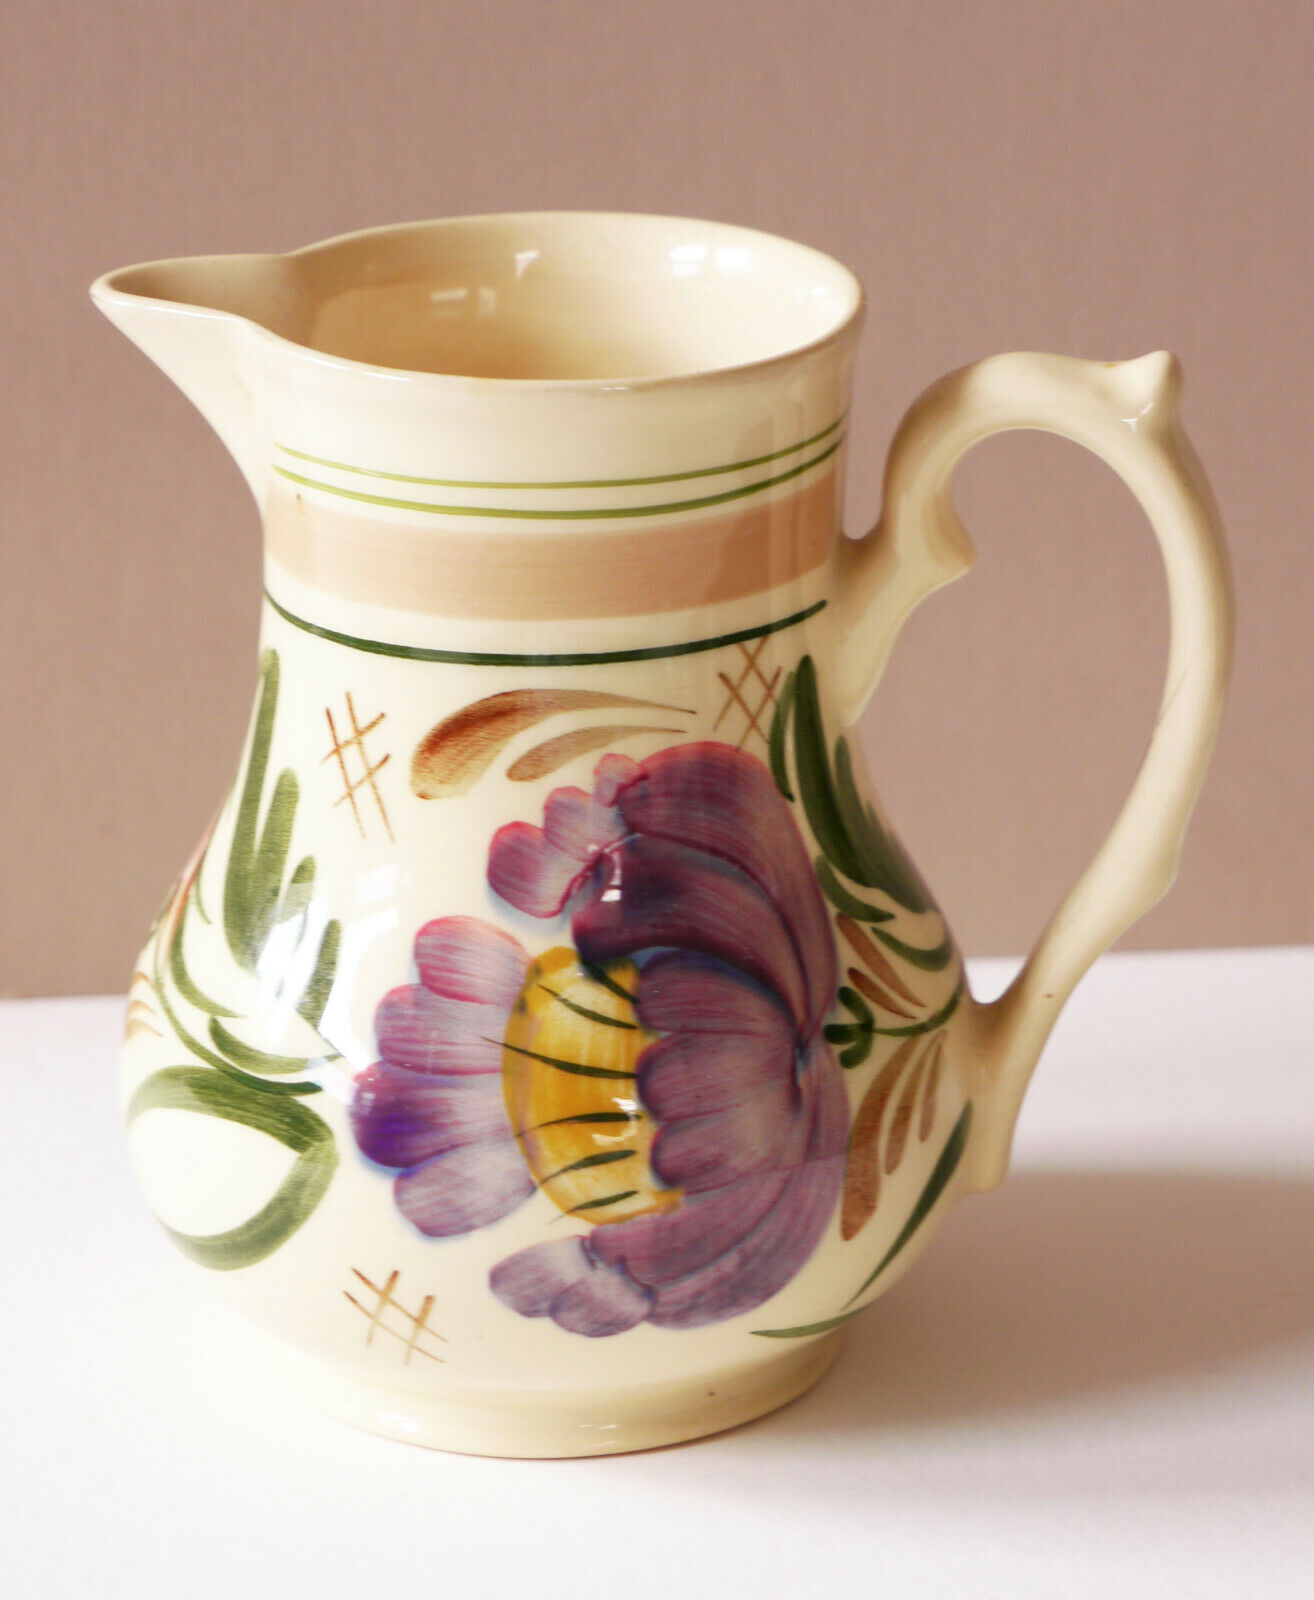 Harvest Ware Wade England Beautiful Painted Creamer/pitcher, Unusual Neck Decor